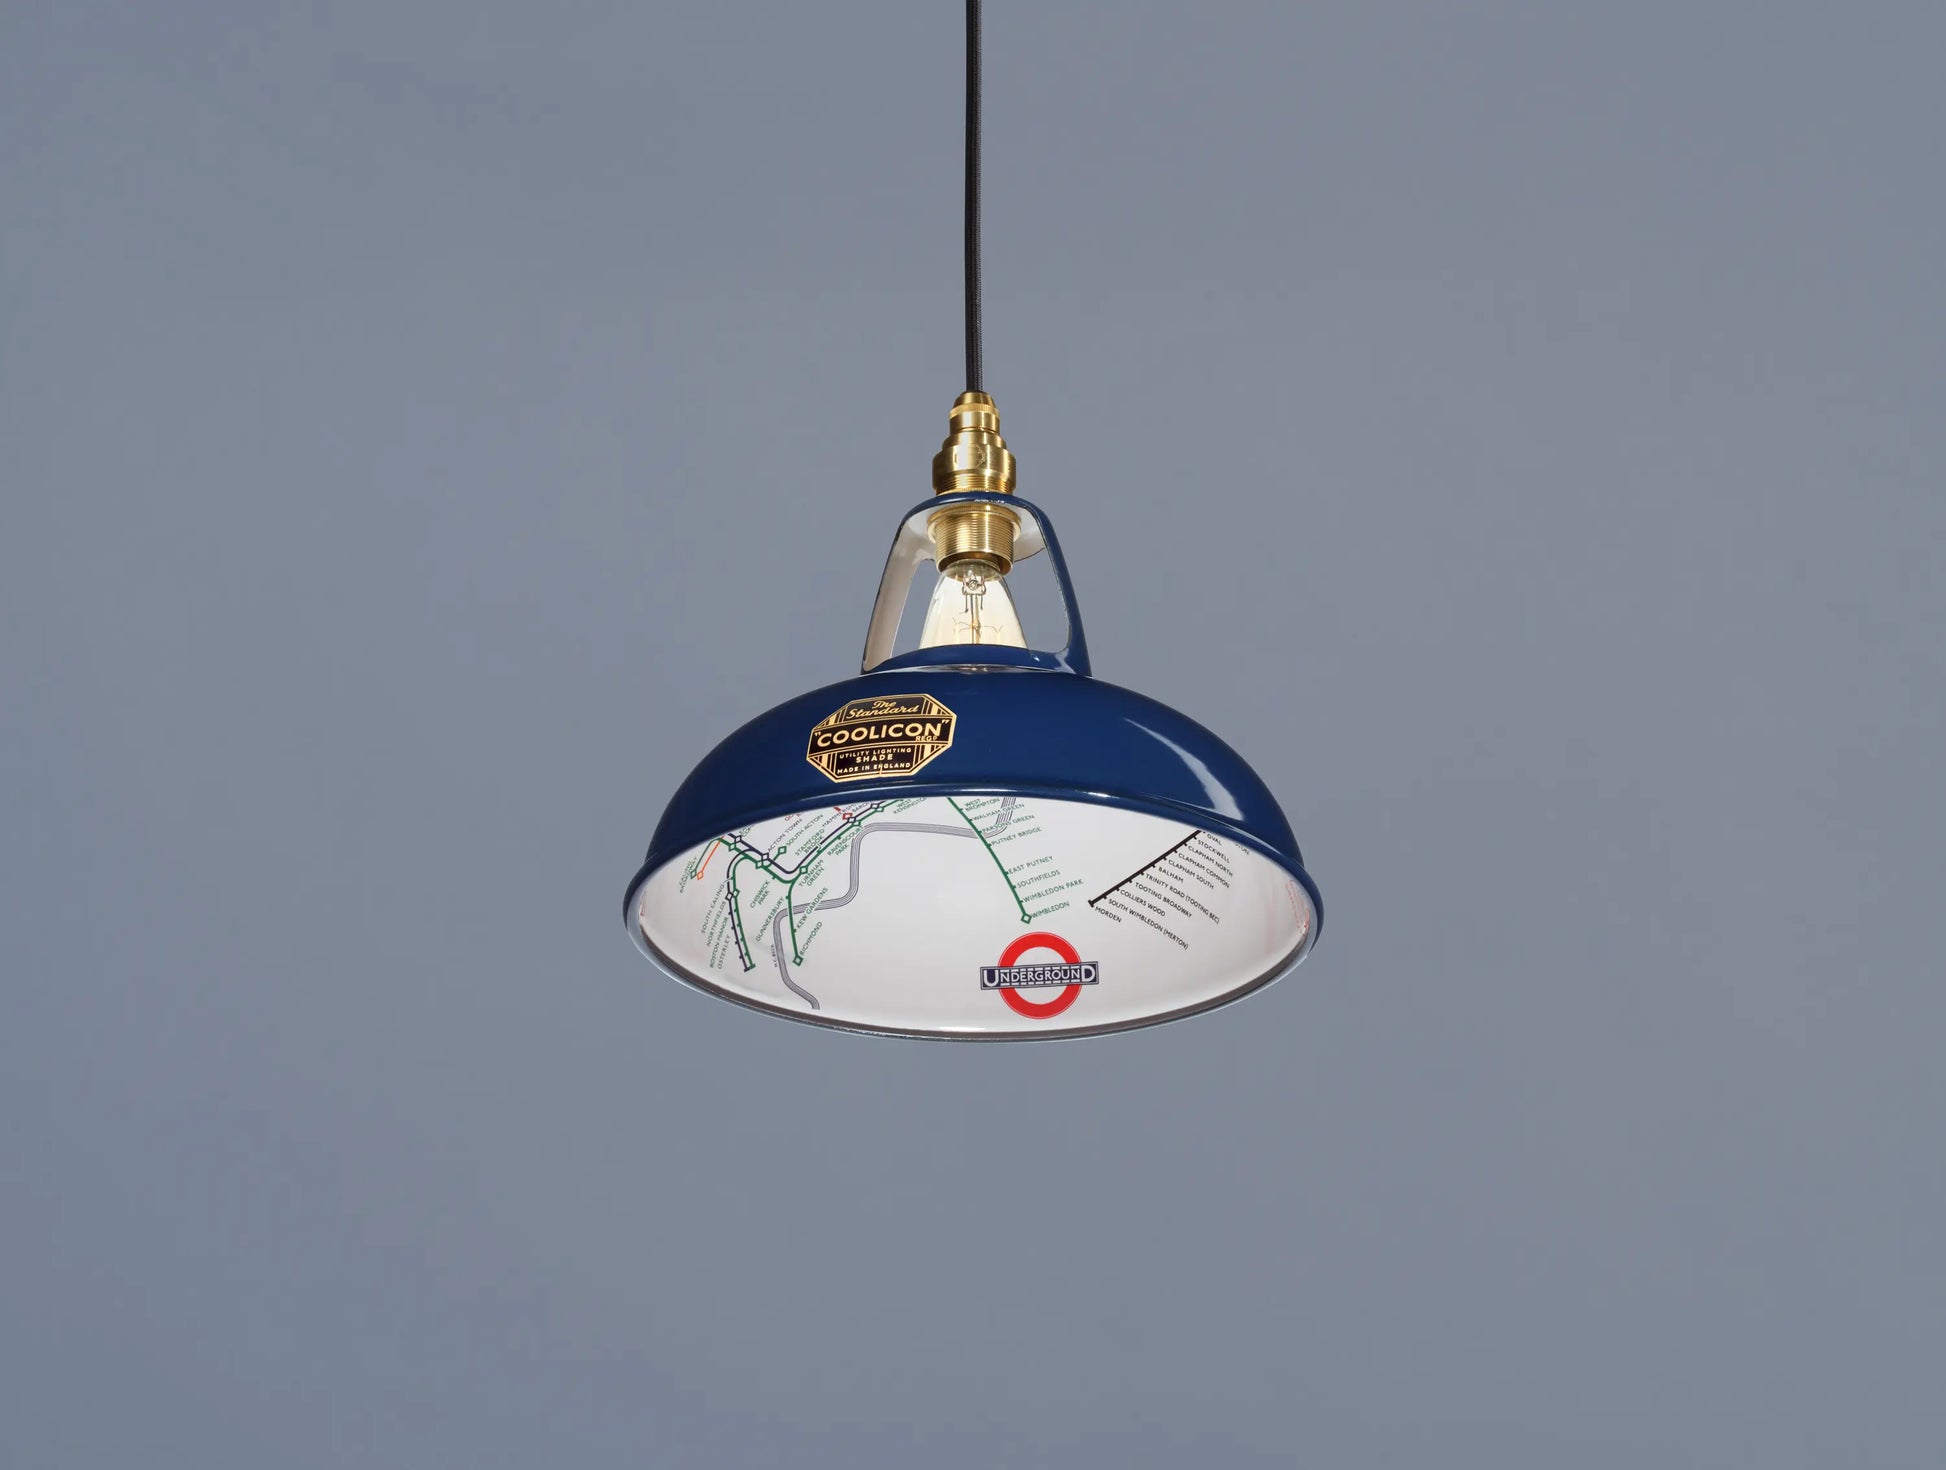 An Original Piccadilly Line Blue shade hanging over a blue background